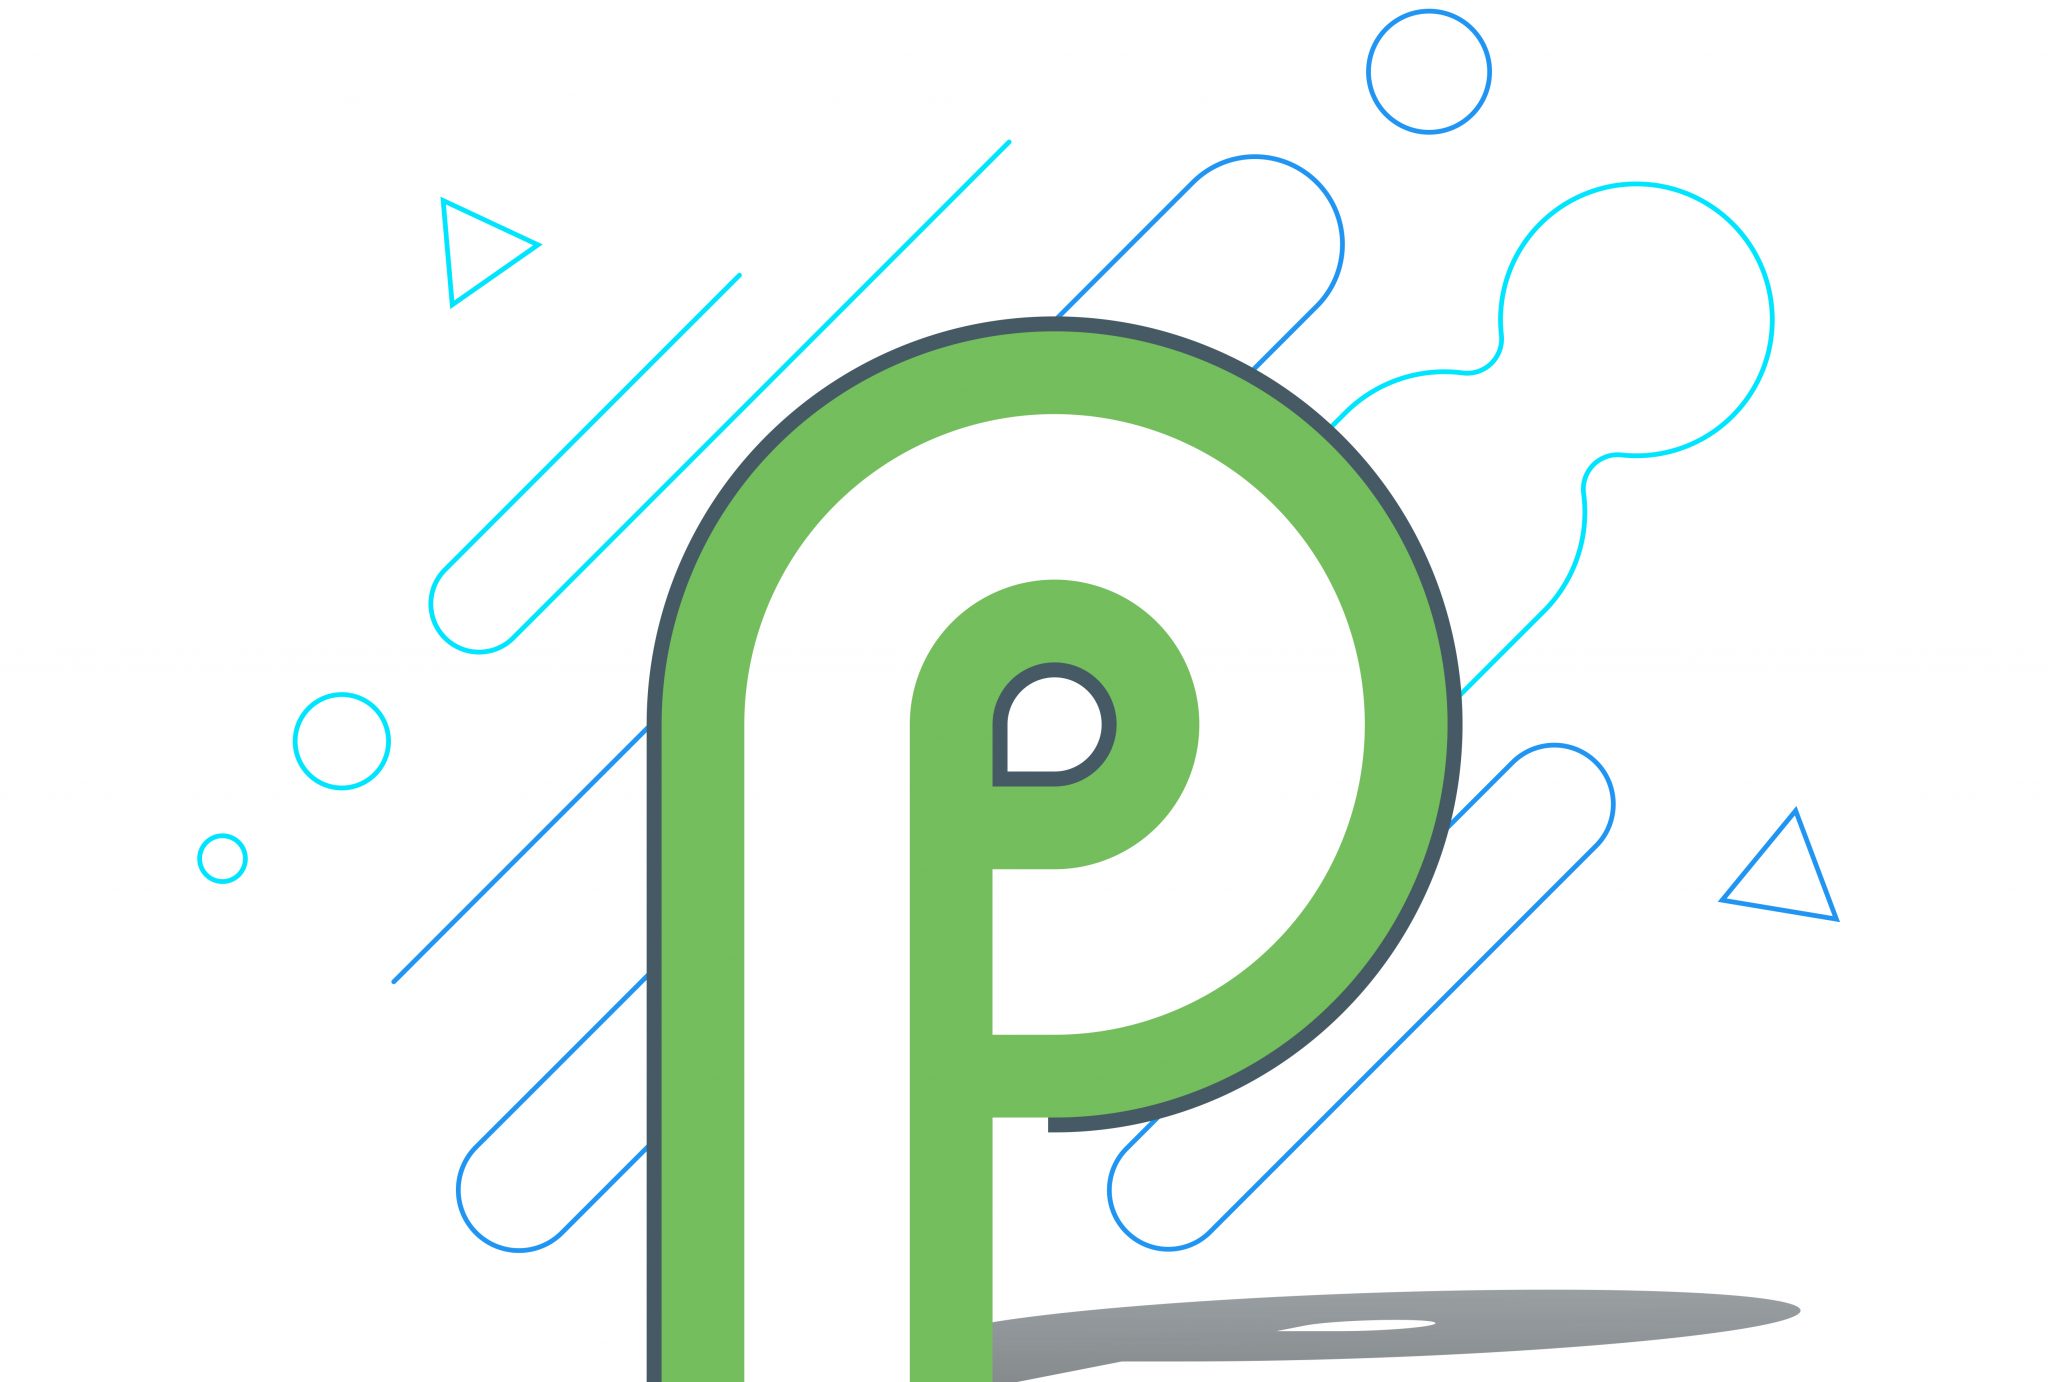 android p - Google announces Android P Developer Preview